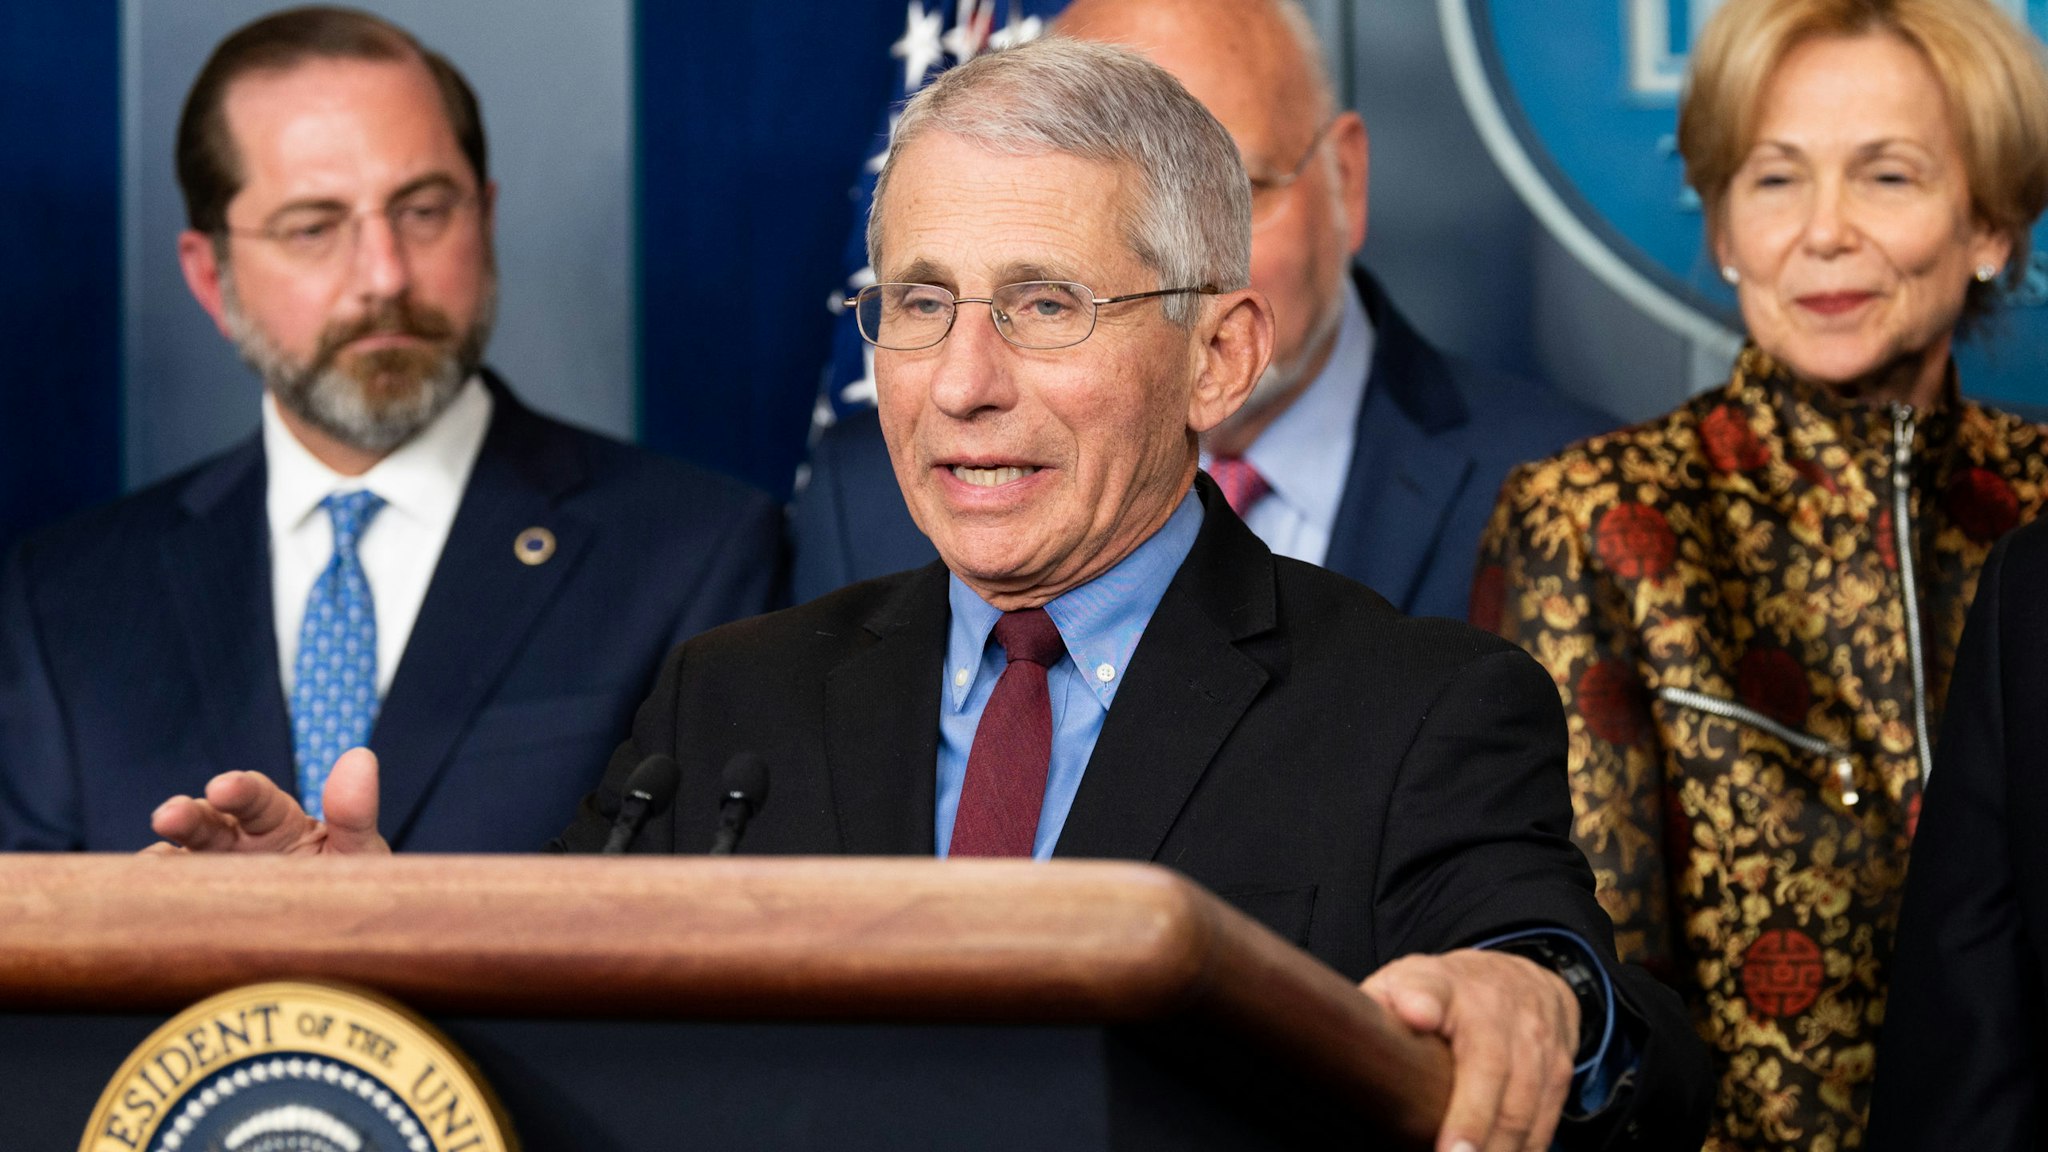 WASHINGTON, UNITED STATES - MARCH 09, 2020: Dr. Anthony Fauci, Director of the National Institute of Allergy and Infectious Diseases speaks at the Coronavirus Task Force Press Conference.